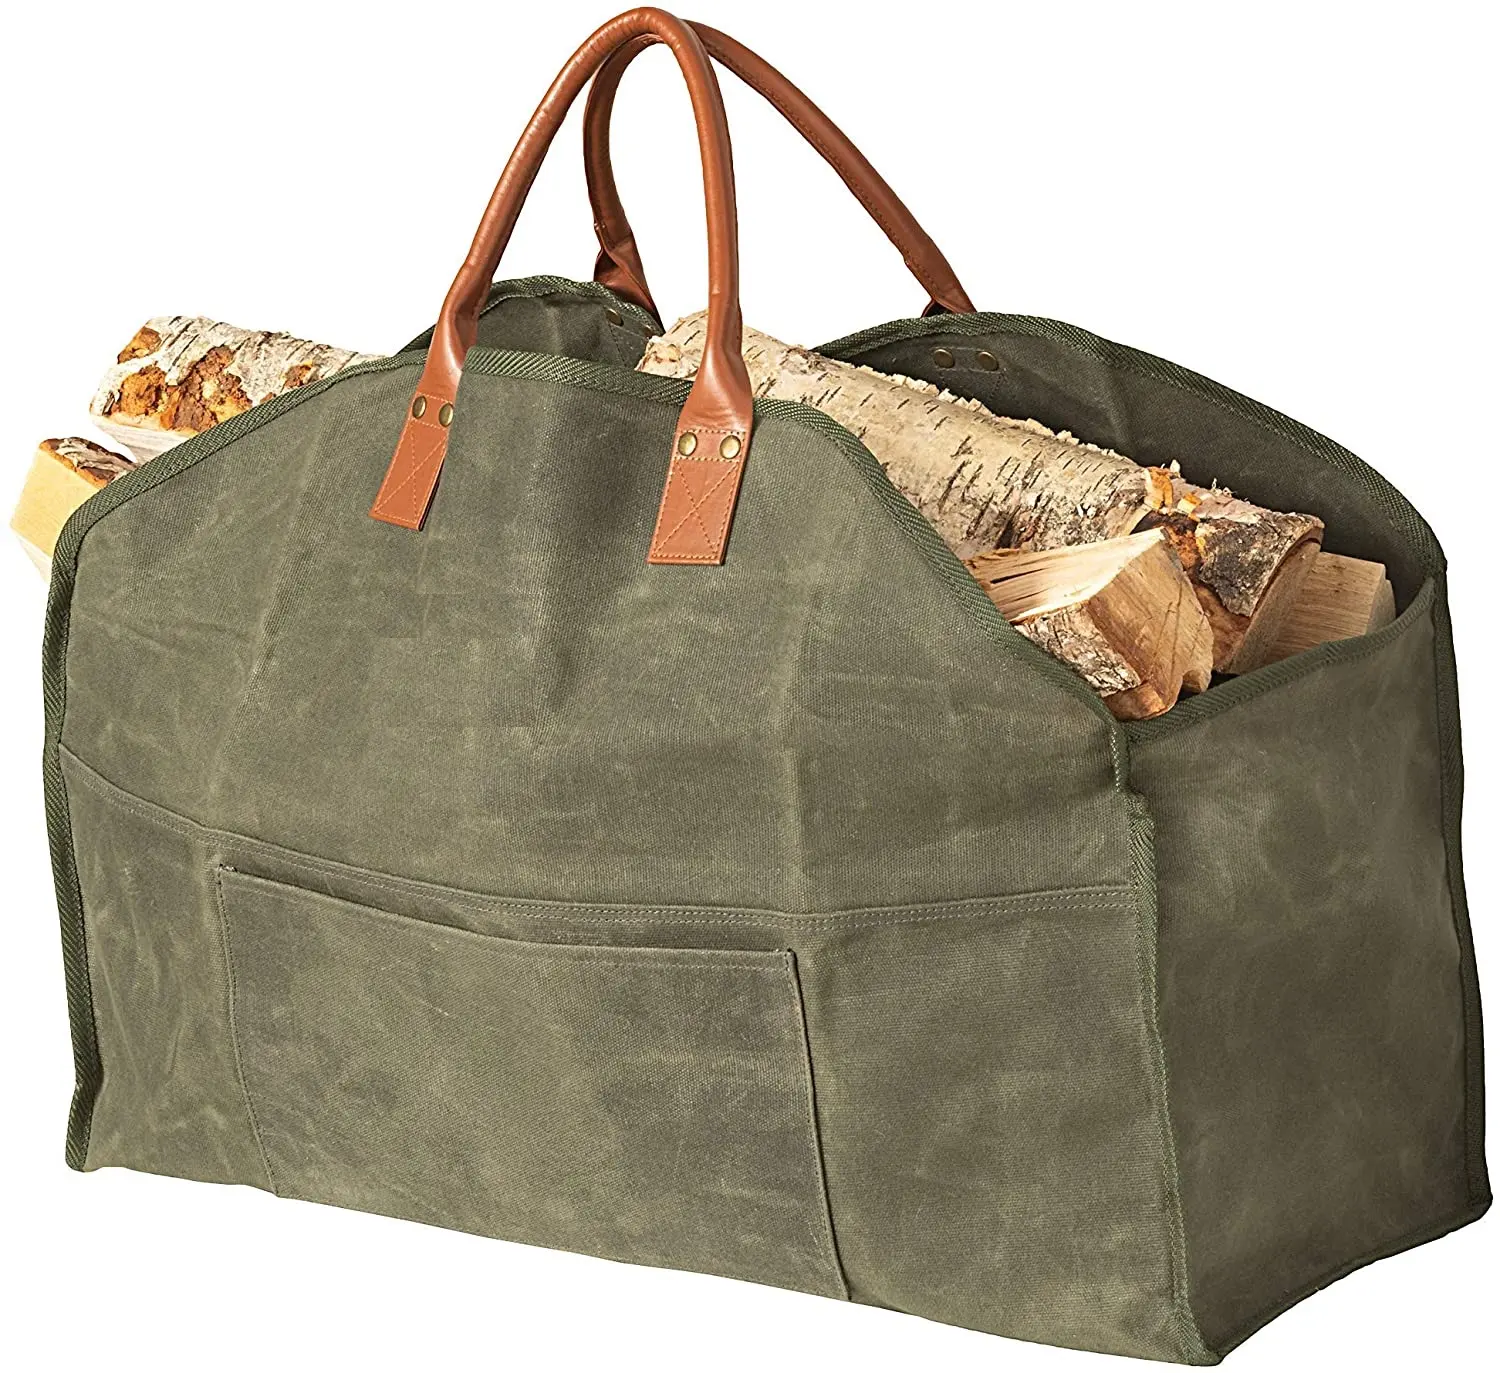 OEM ODM Waxed Canvas Firewood Log Carrier Tote Bag With PU Handle